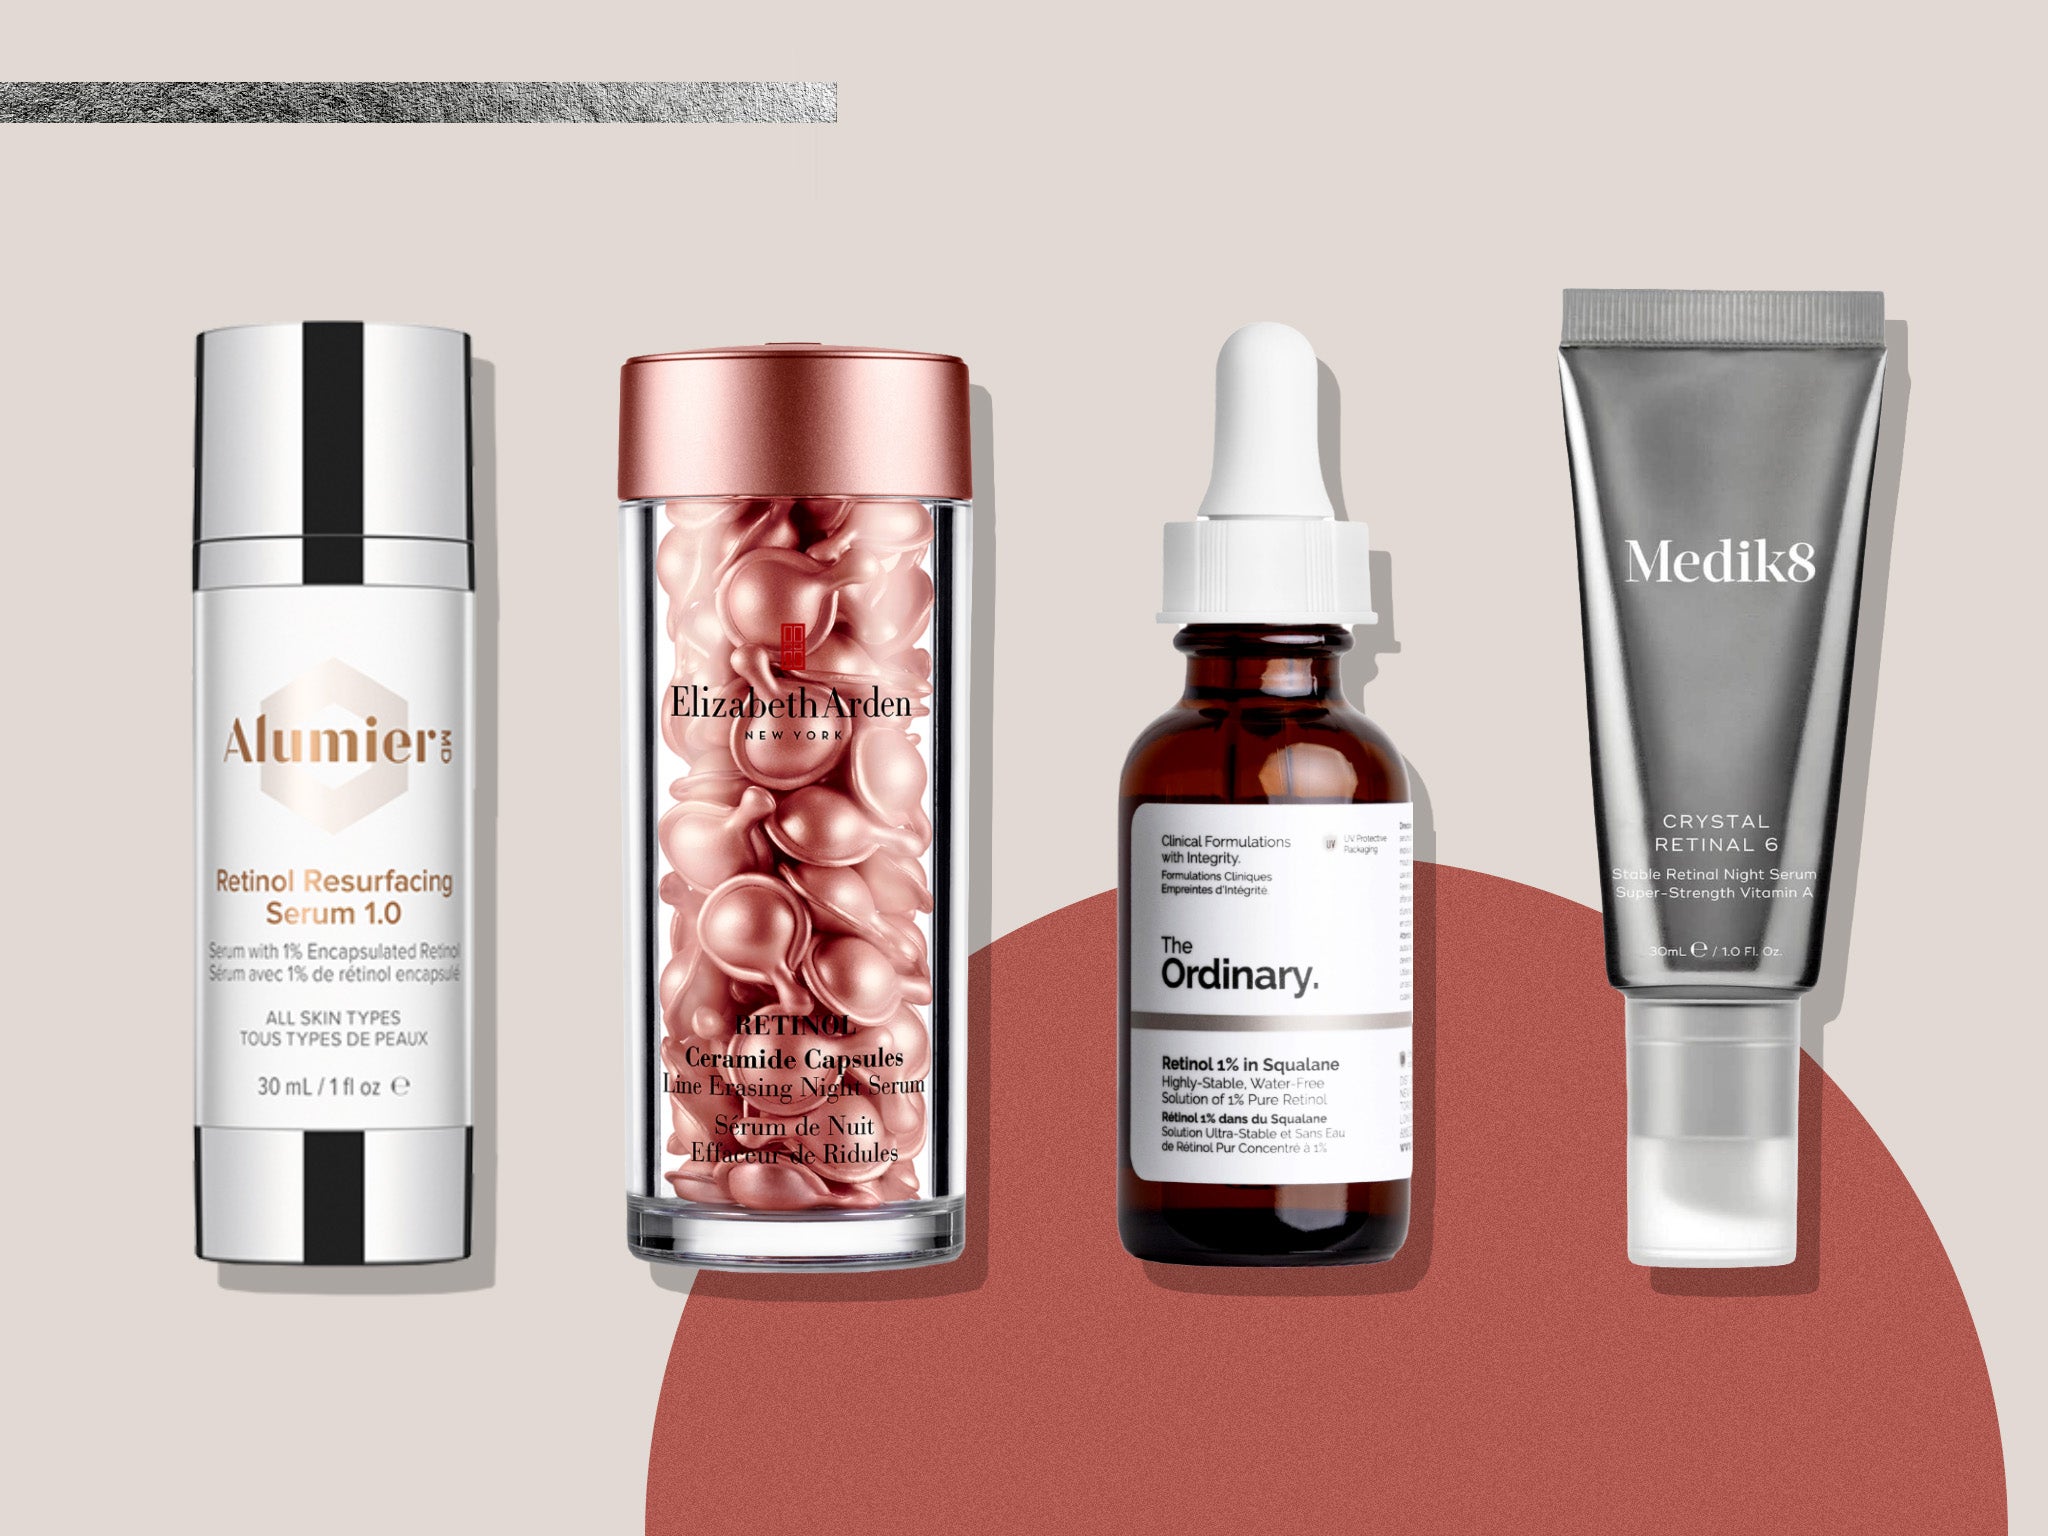 Best retinol For beginners, sensitive and easing pigmentation | The Independent